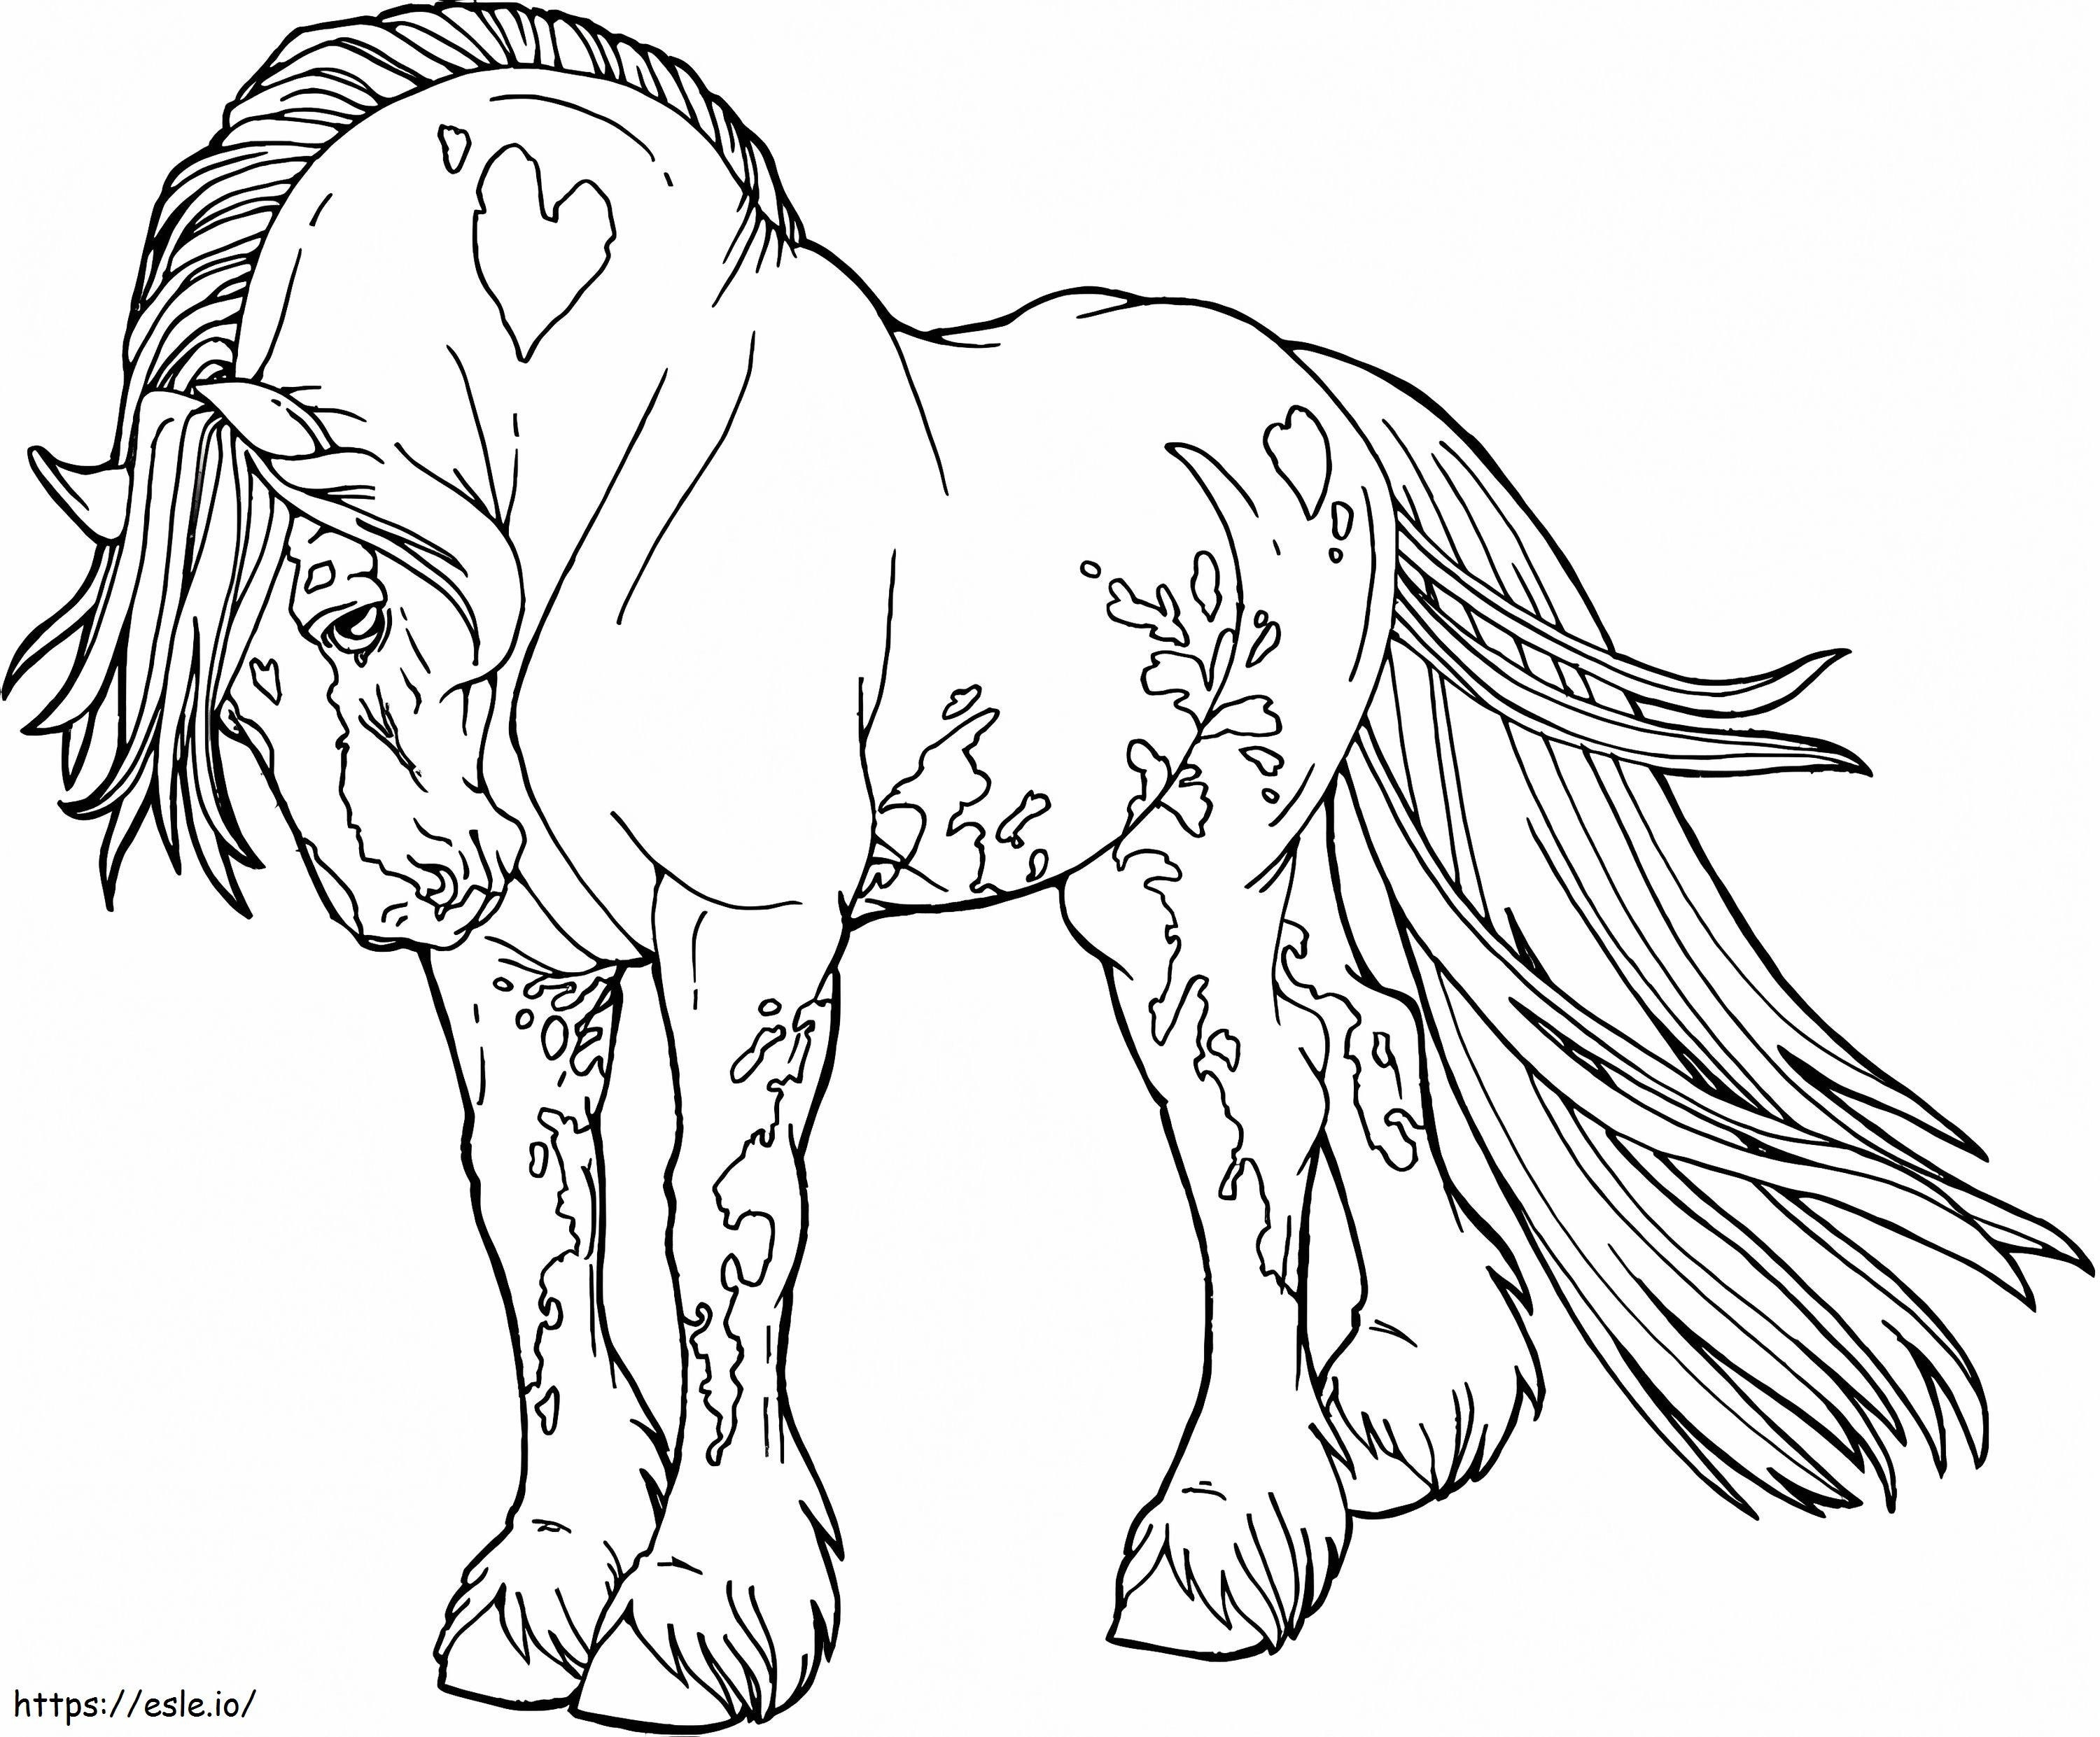 Con Nge1Bbb1A Mustang C491E1Bab9P E1607108910437 coloring page